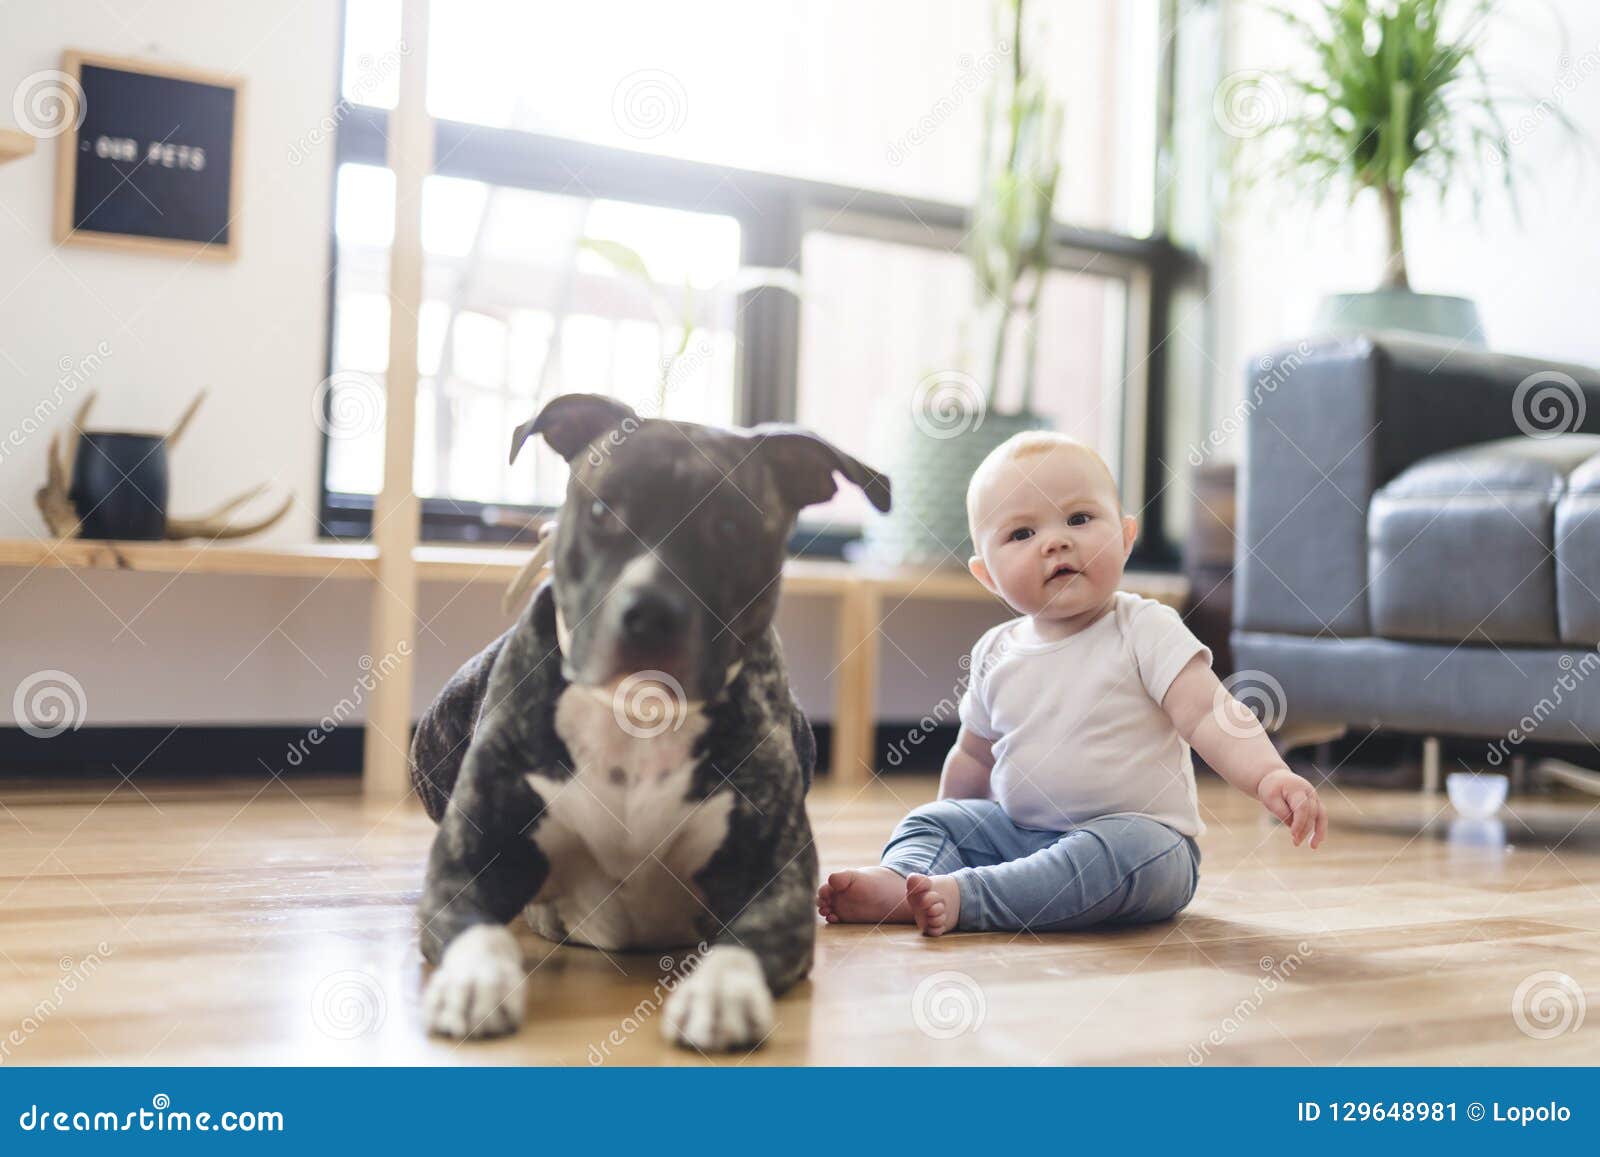 Baby Girl Sitting With Pitbull On The Floor Stock Image Image Of